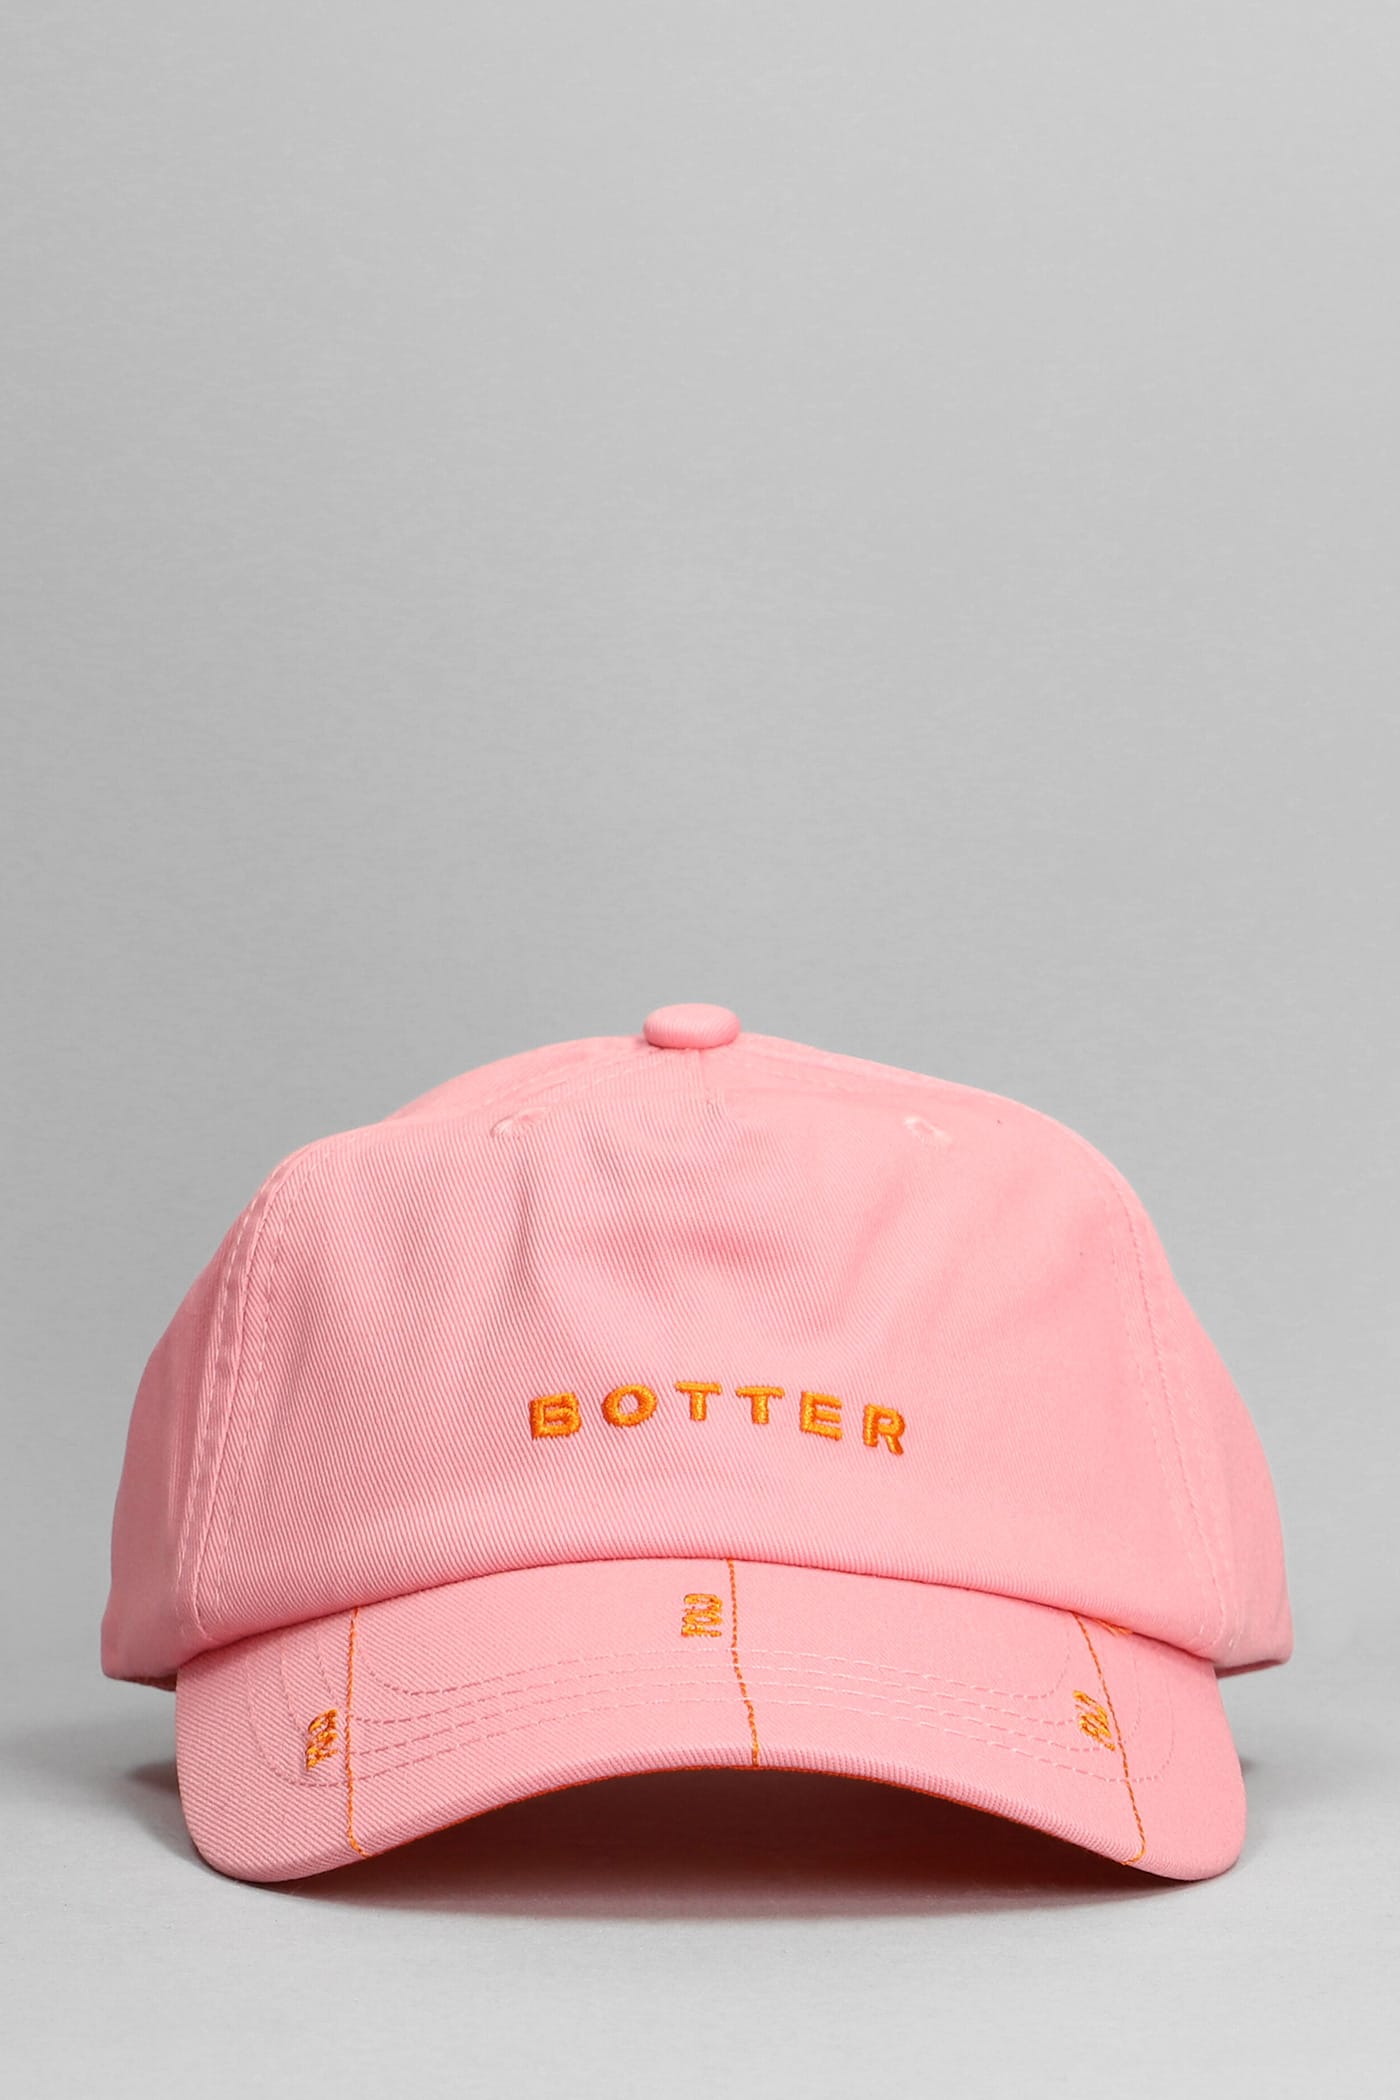 Botter Hats In Rose-pink Cotton